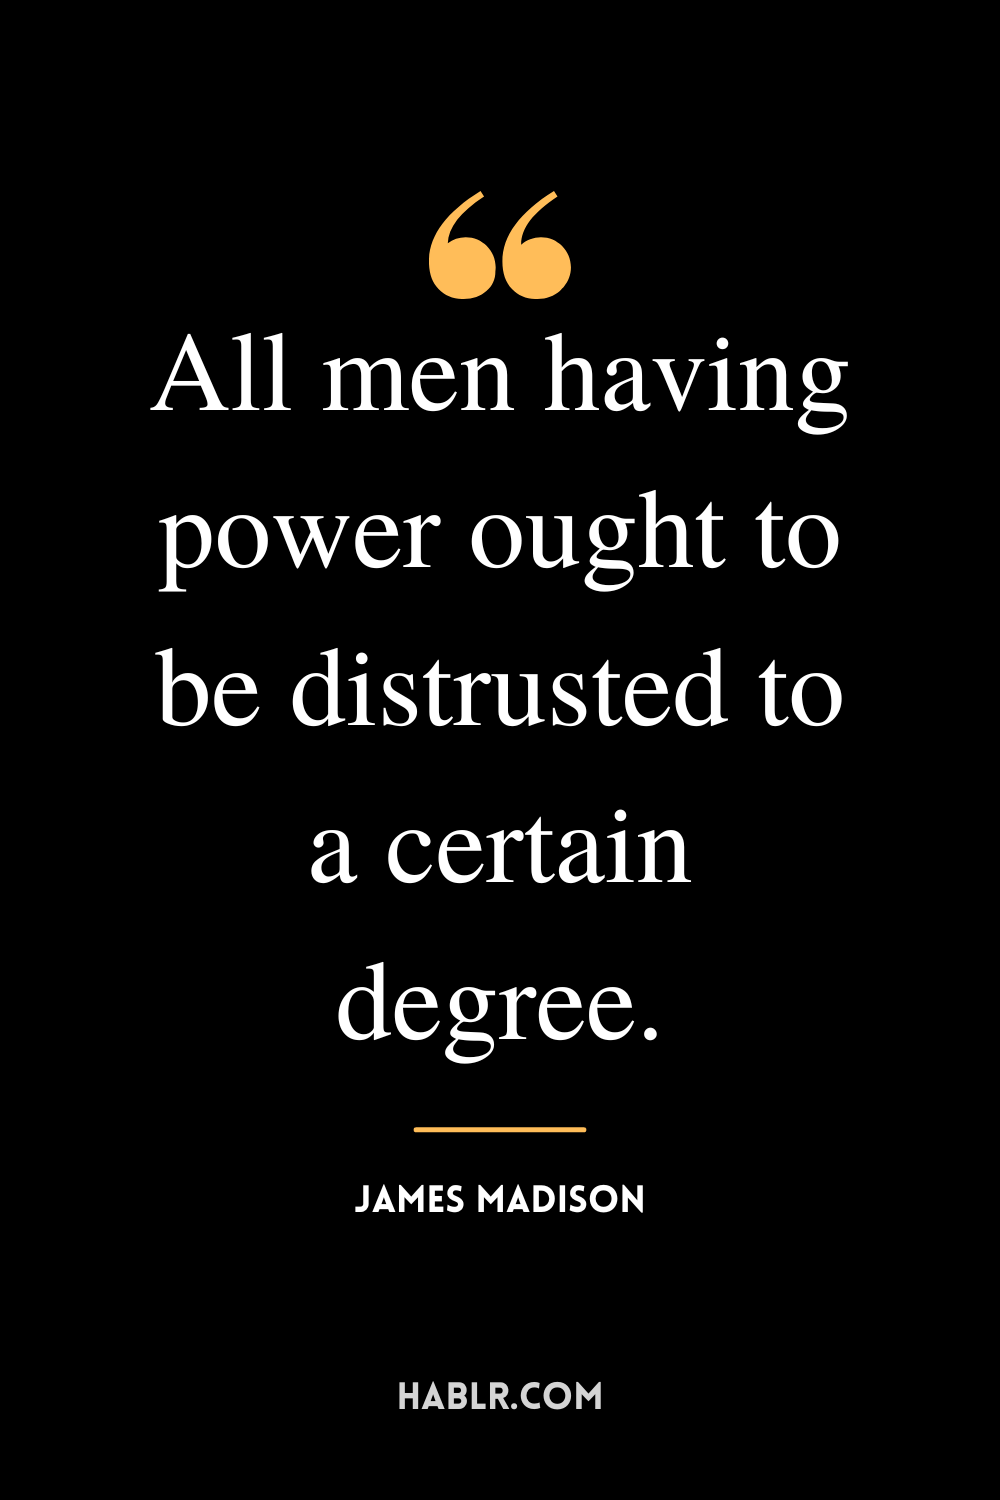 “All men having power ought to be distrusted to a certain degree.” -James Madison